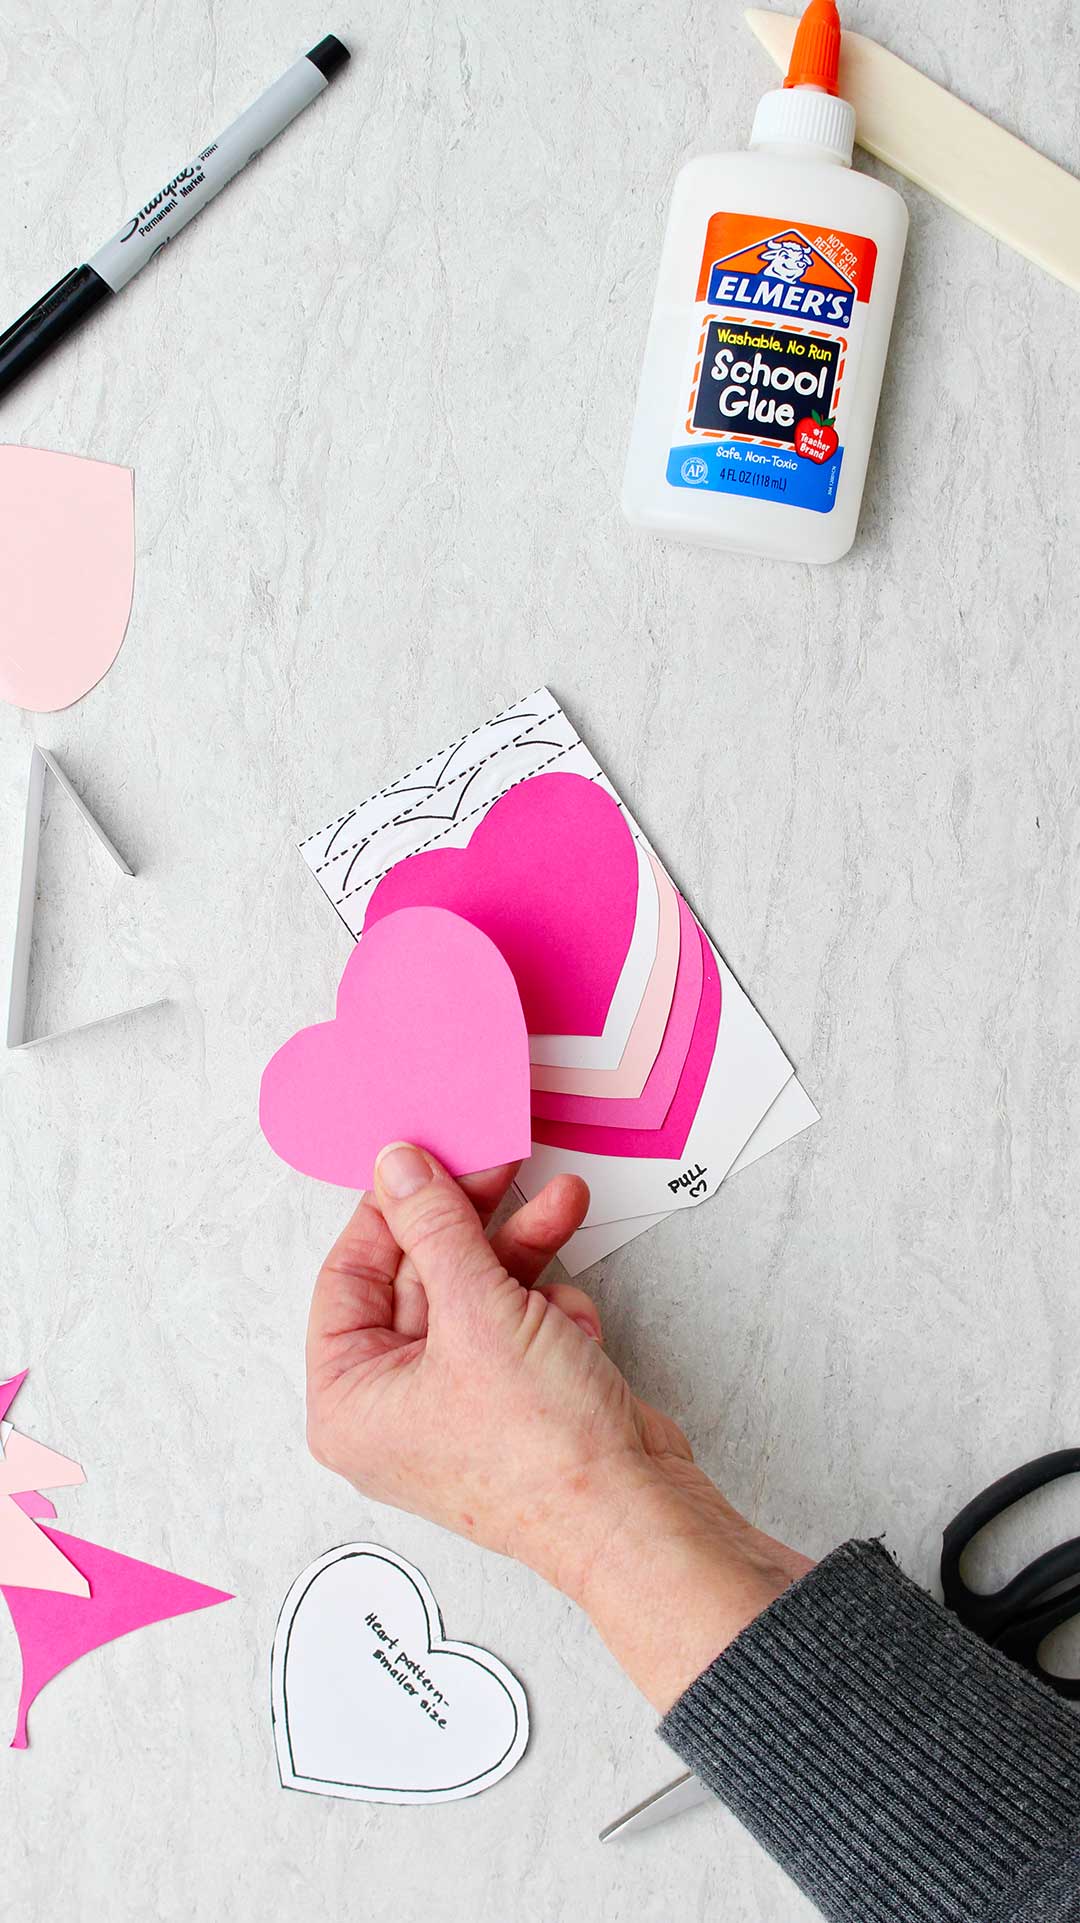 Hand holding a pink heart getting ready to line it up on the template for the waterfall card.